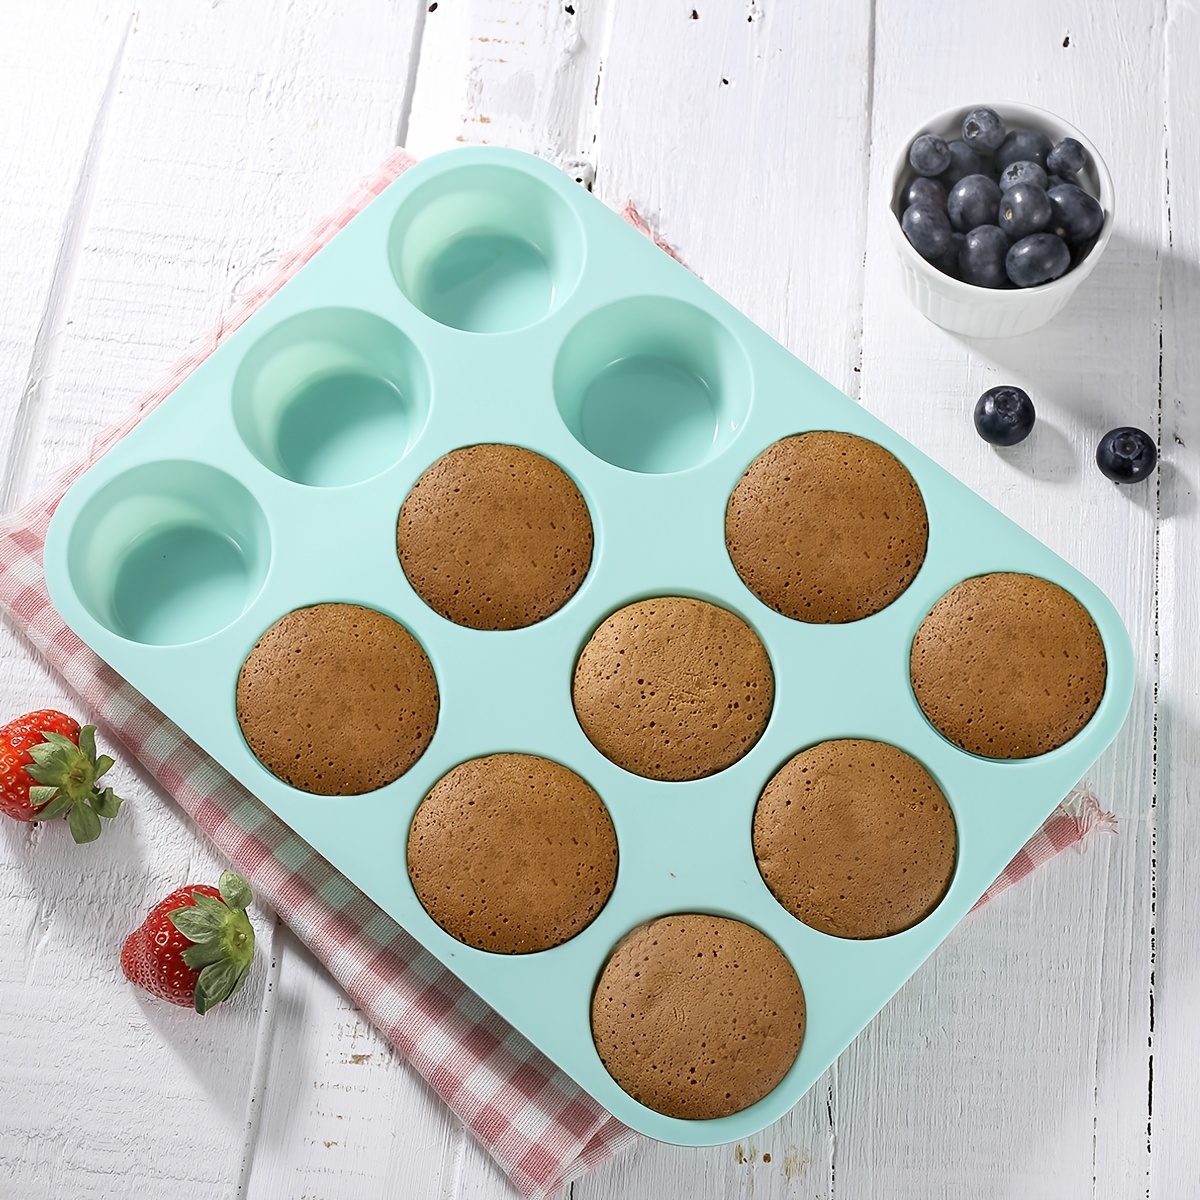 WALFOS Donut Mould Silicone Mold Muffin Cupcake Bread Cake Baking